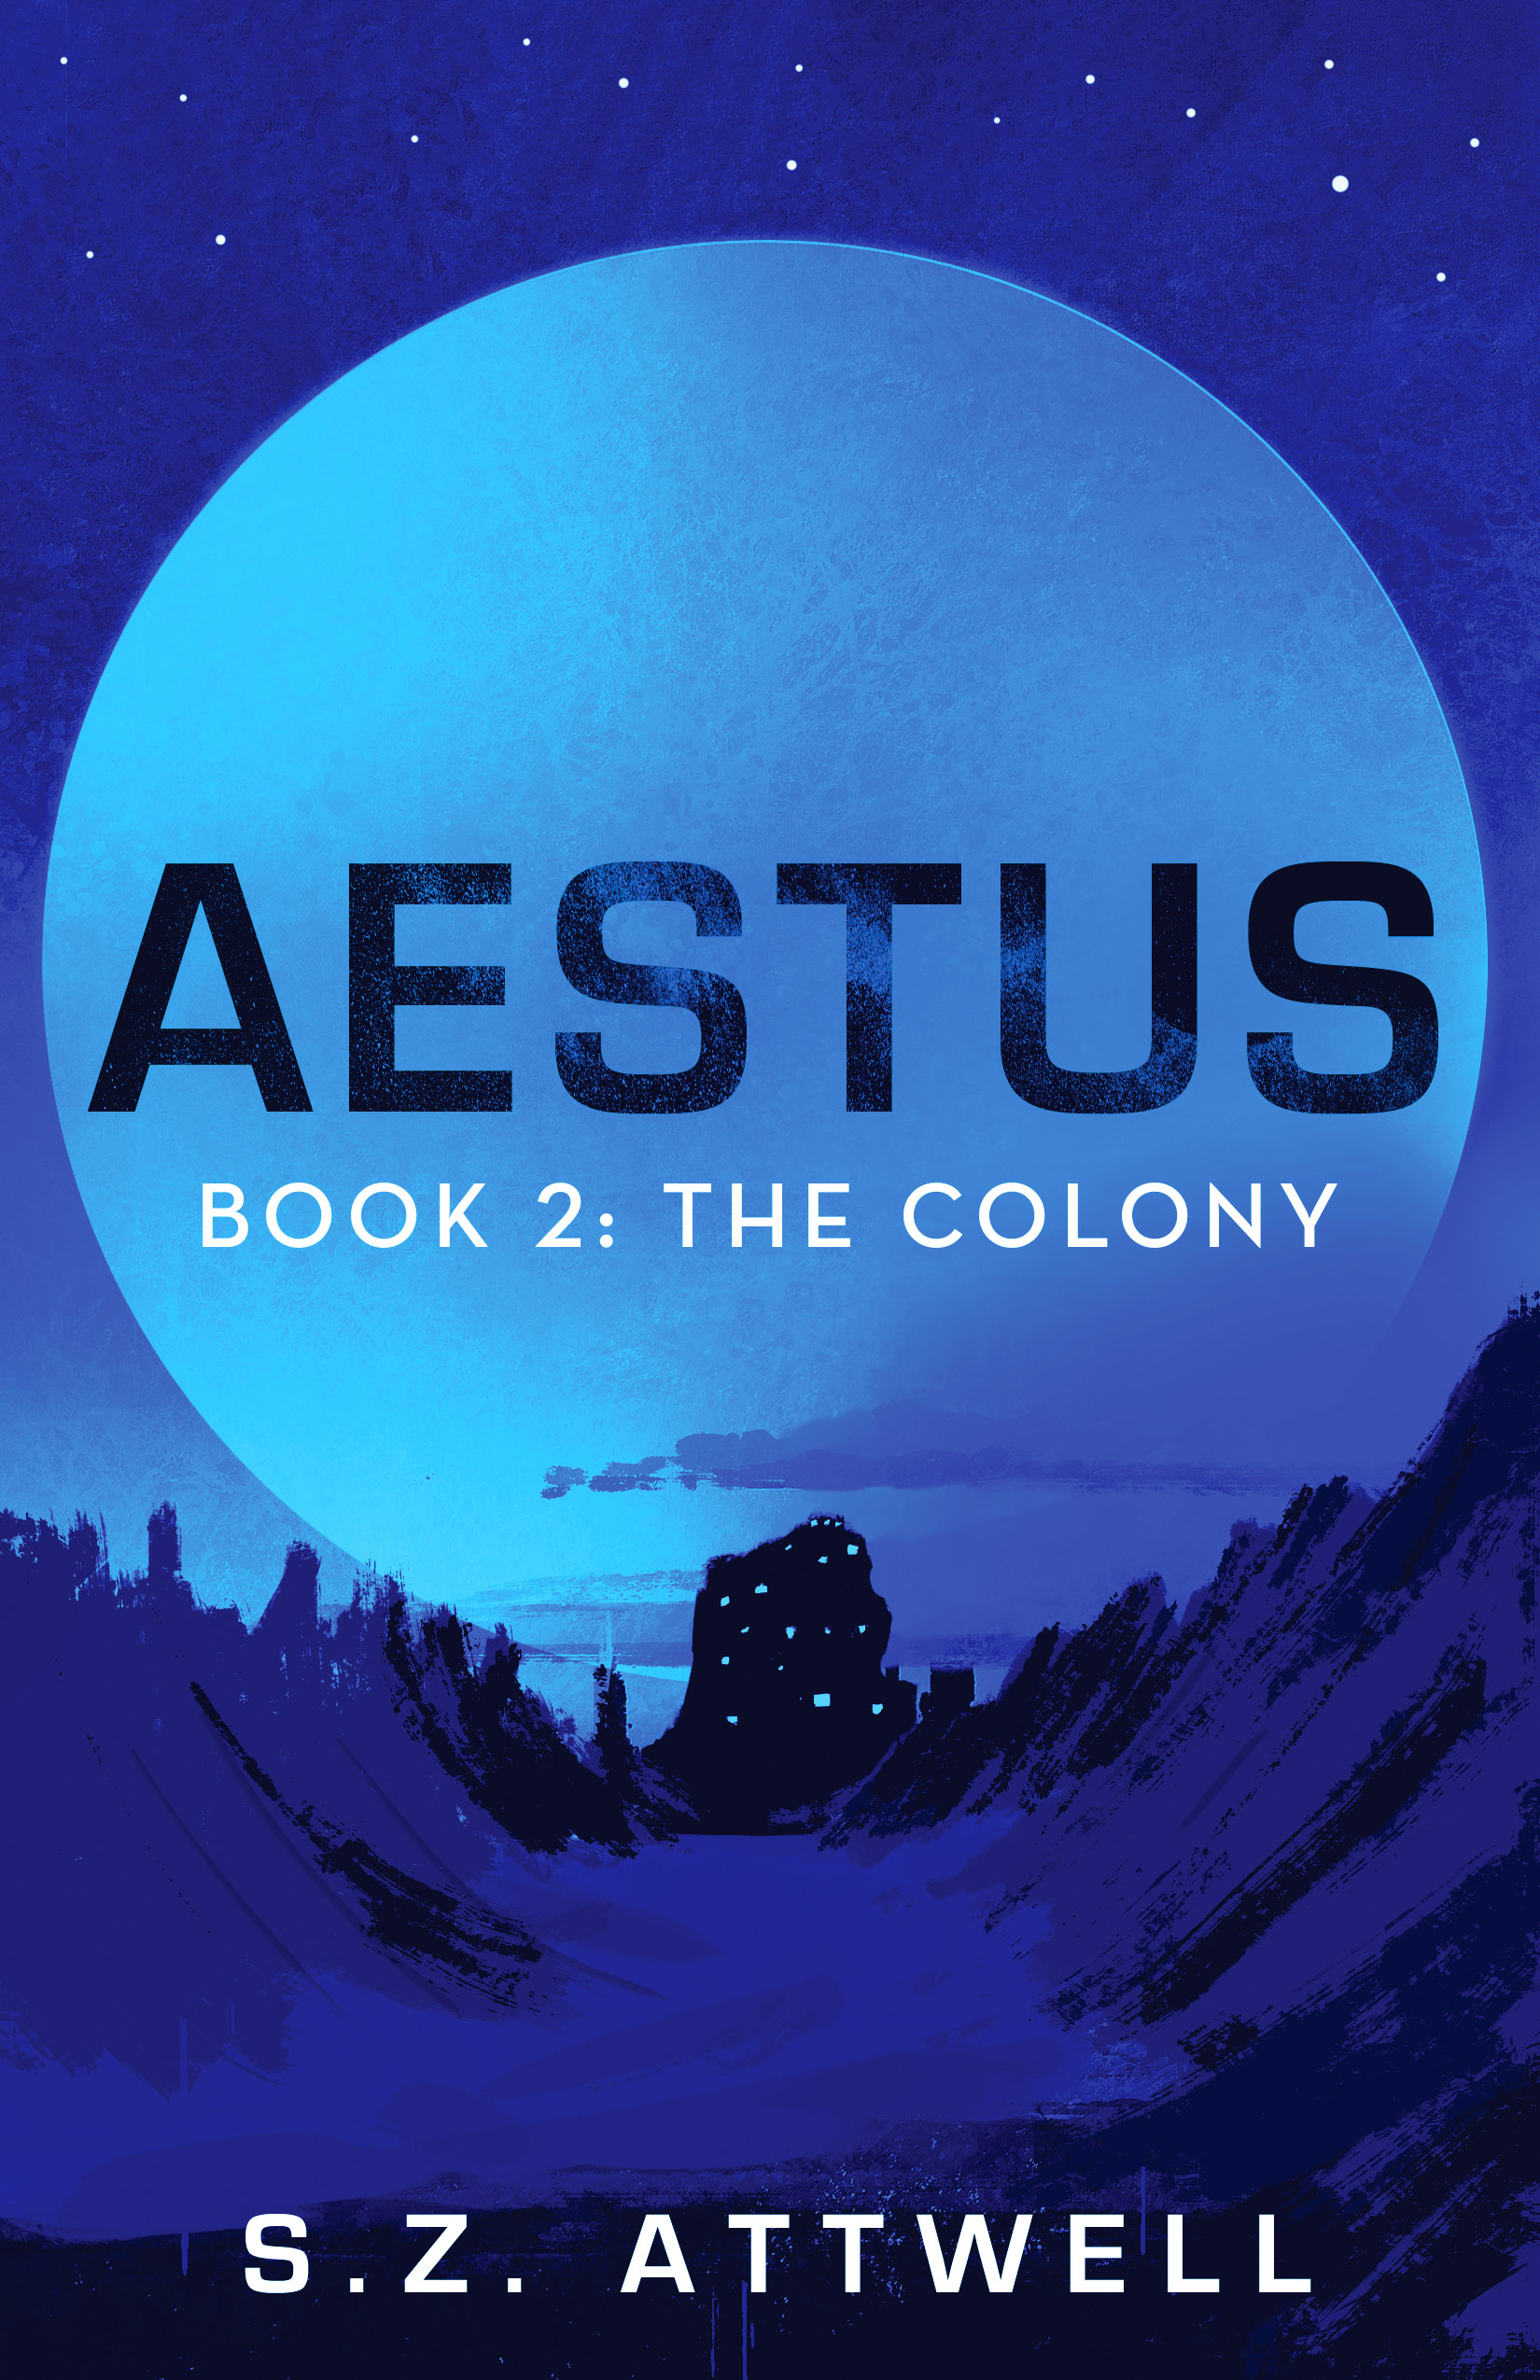 Aestus Book 2: The colony by S.Z. Attwell cover. Everything is blue or dark blue. Night. Stars in the sky. A huge blue moon. A wide road or valley with mountains on both sides of it. A dark building at the end of it.